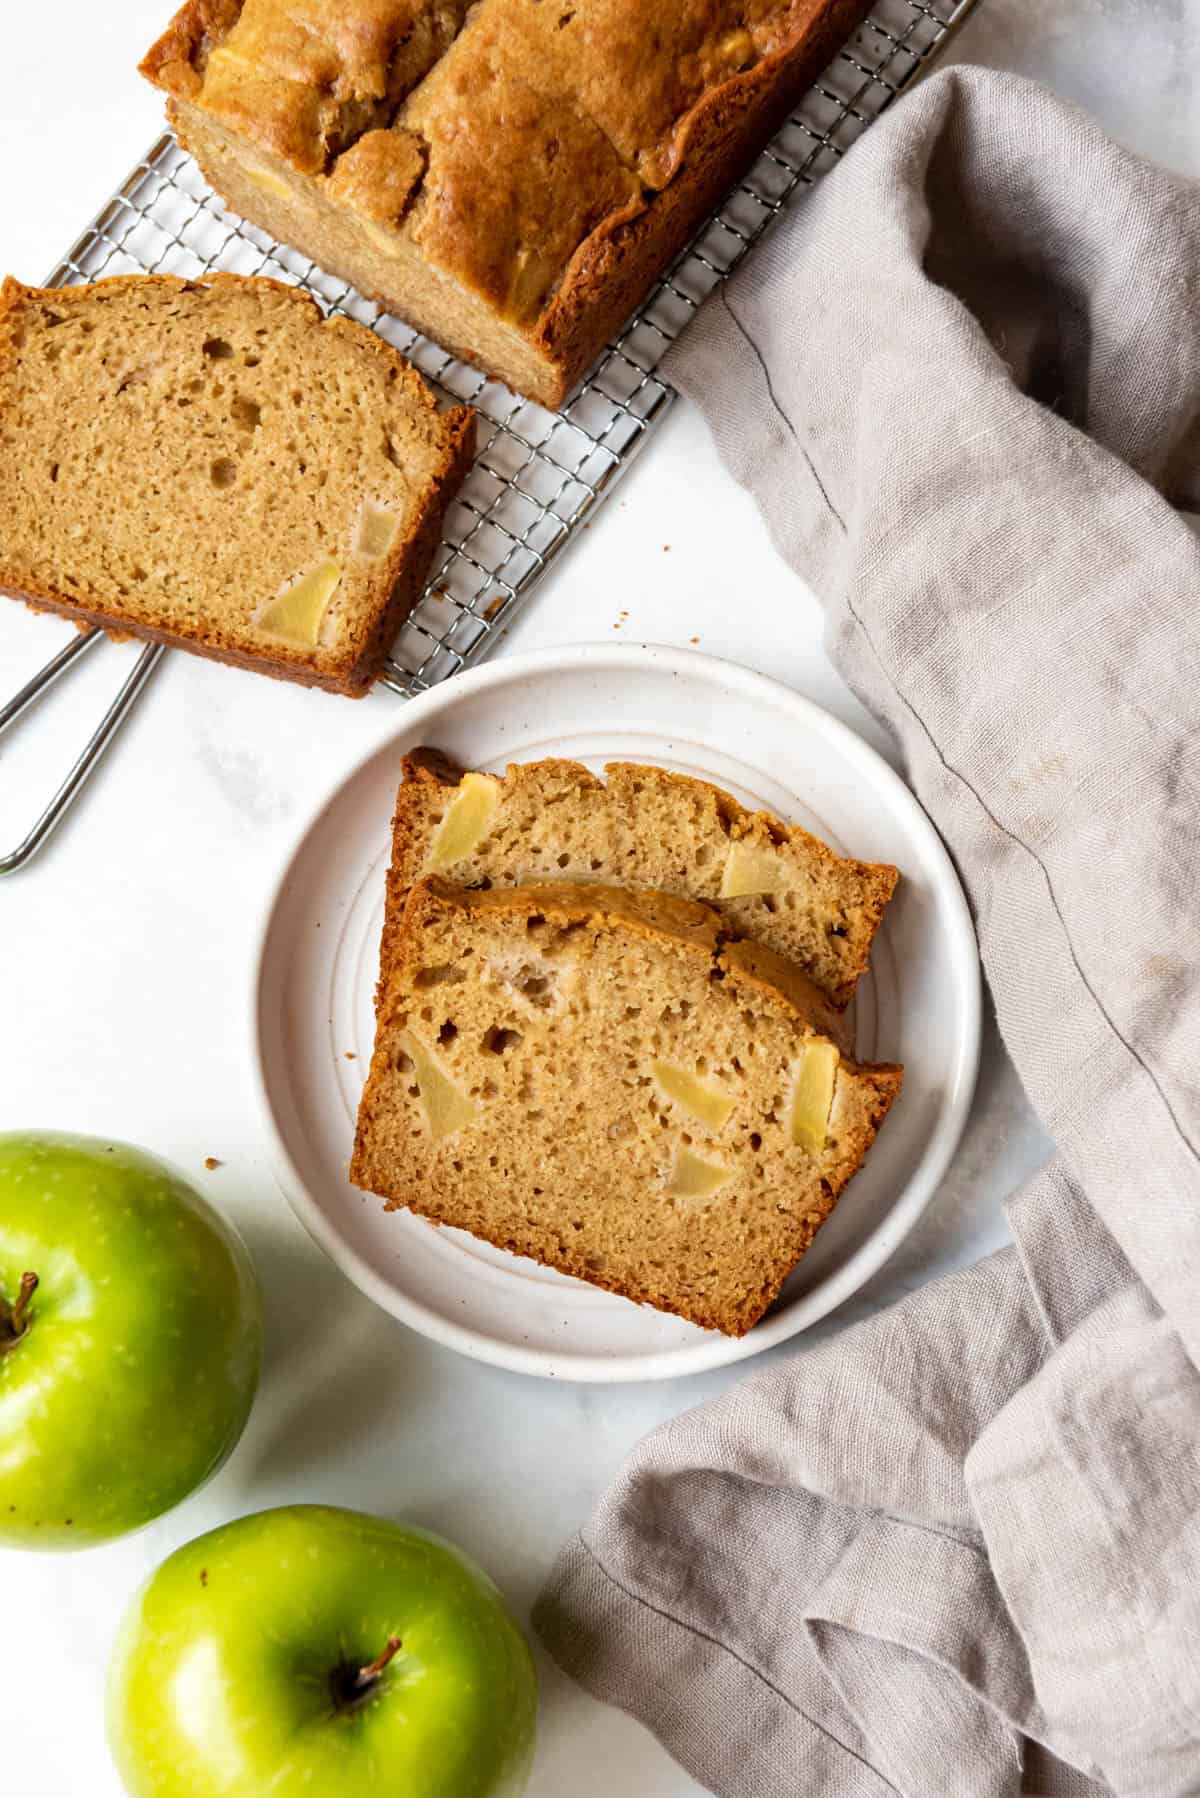 Sliced apple ginger quick bread on a plate next to the rest of the loaf and two green apples.